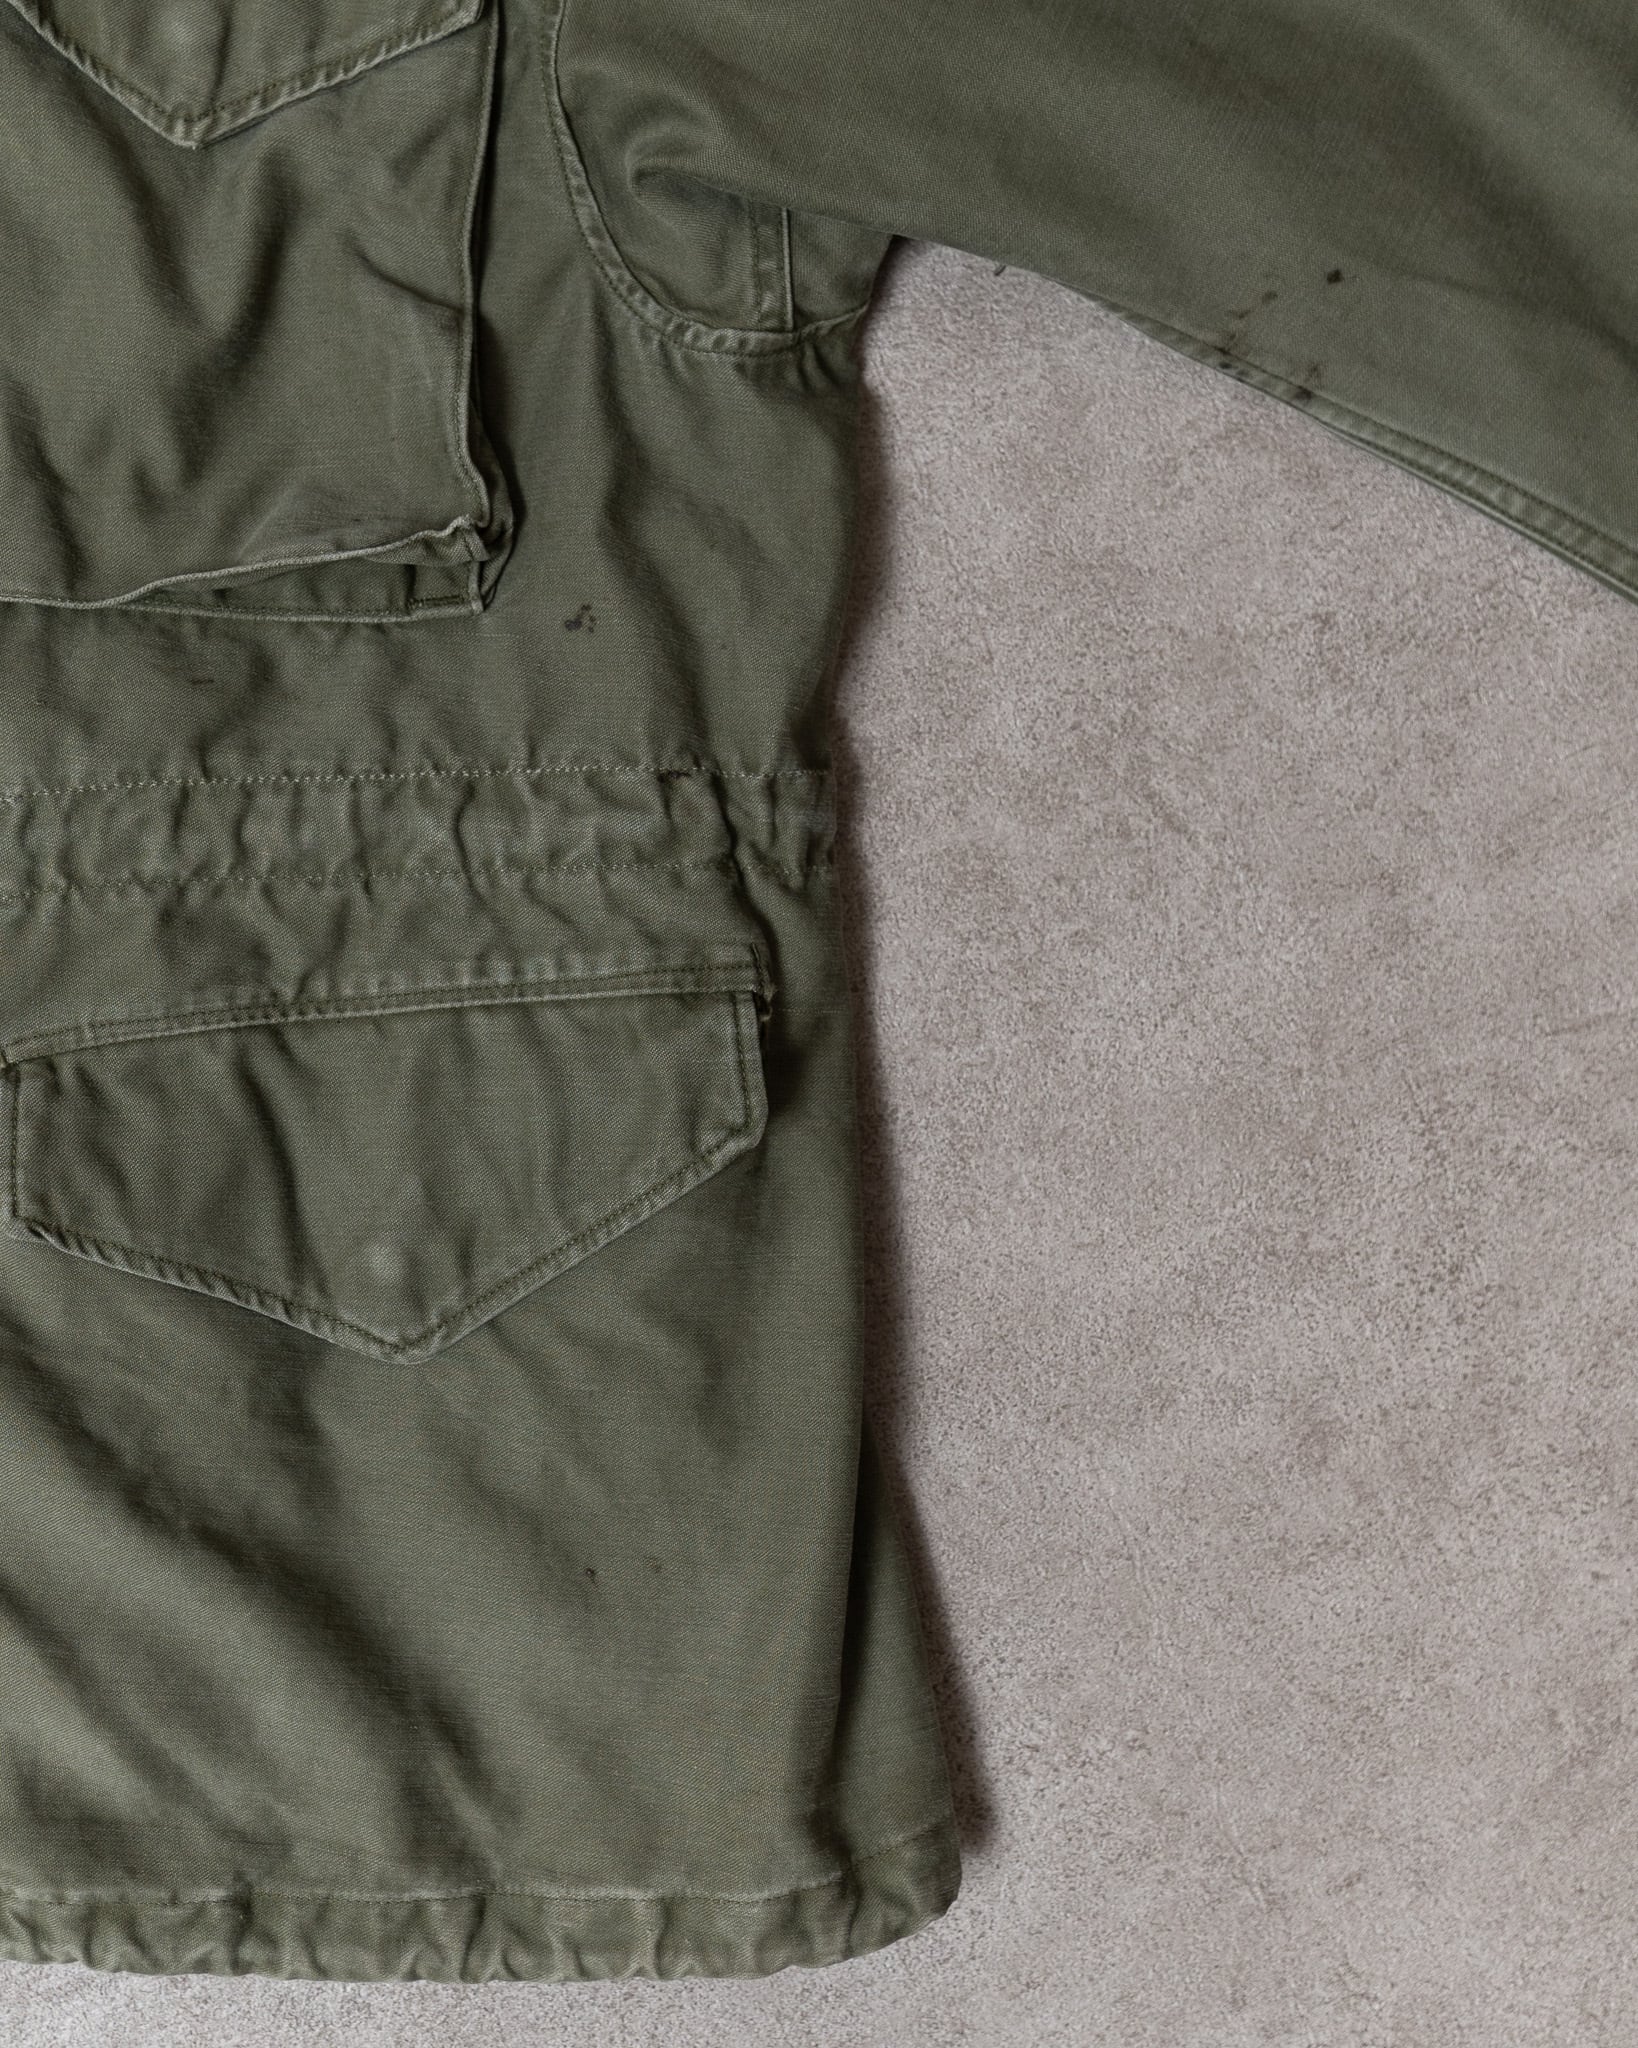 M SU.S.Army 's M Field Jacket "Used" アメリカ軍 M